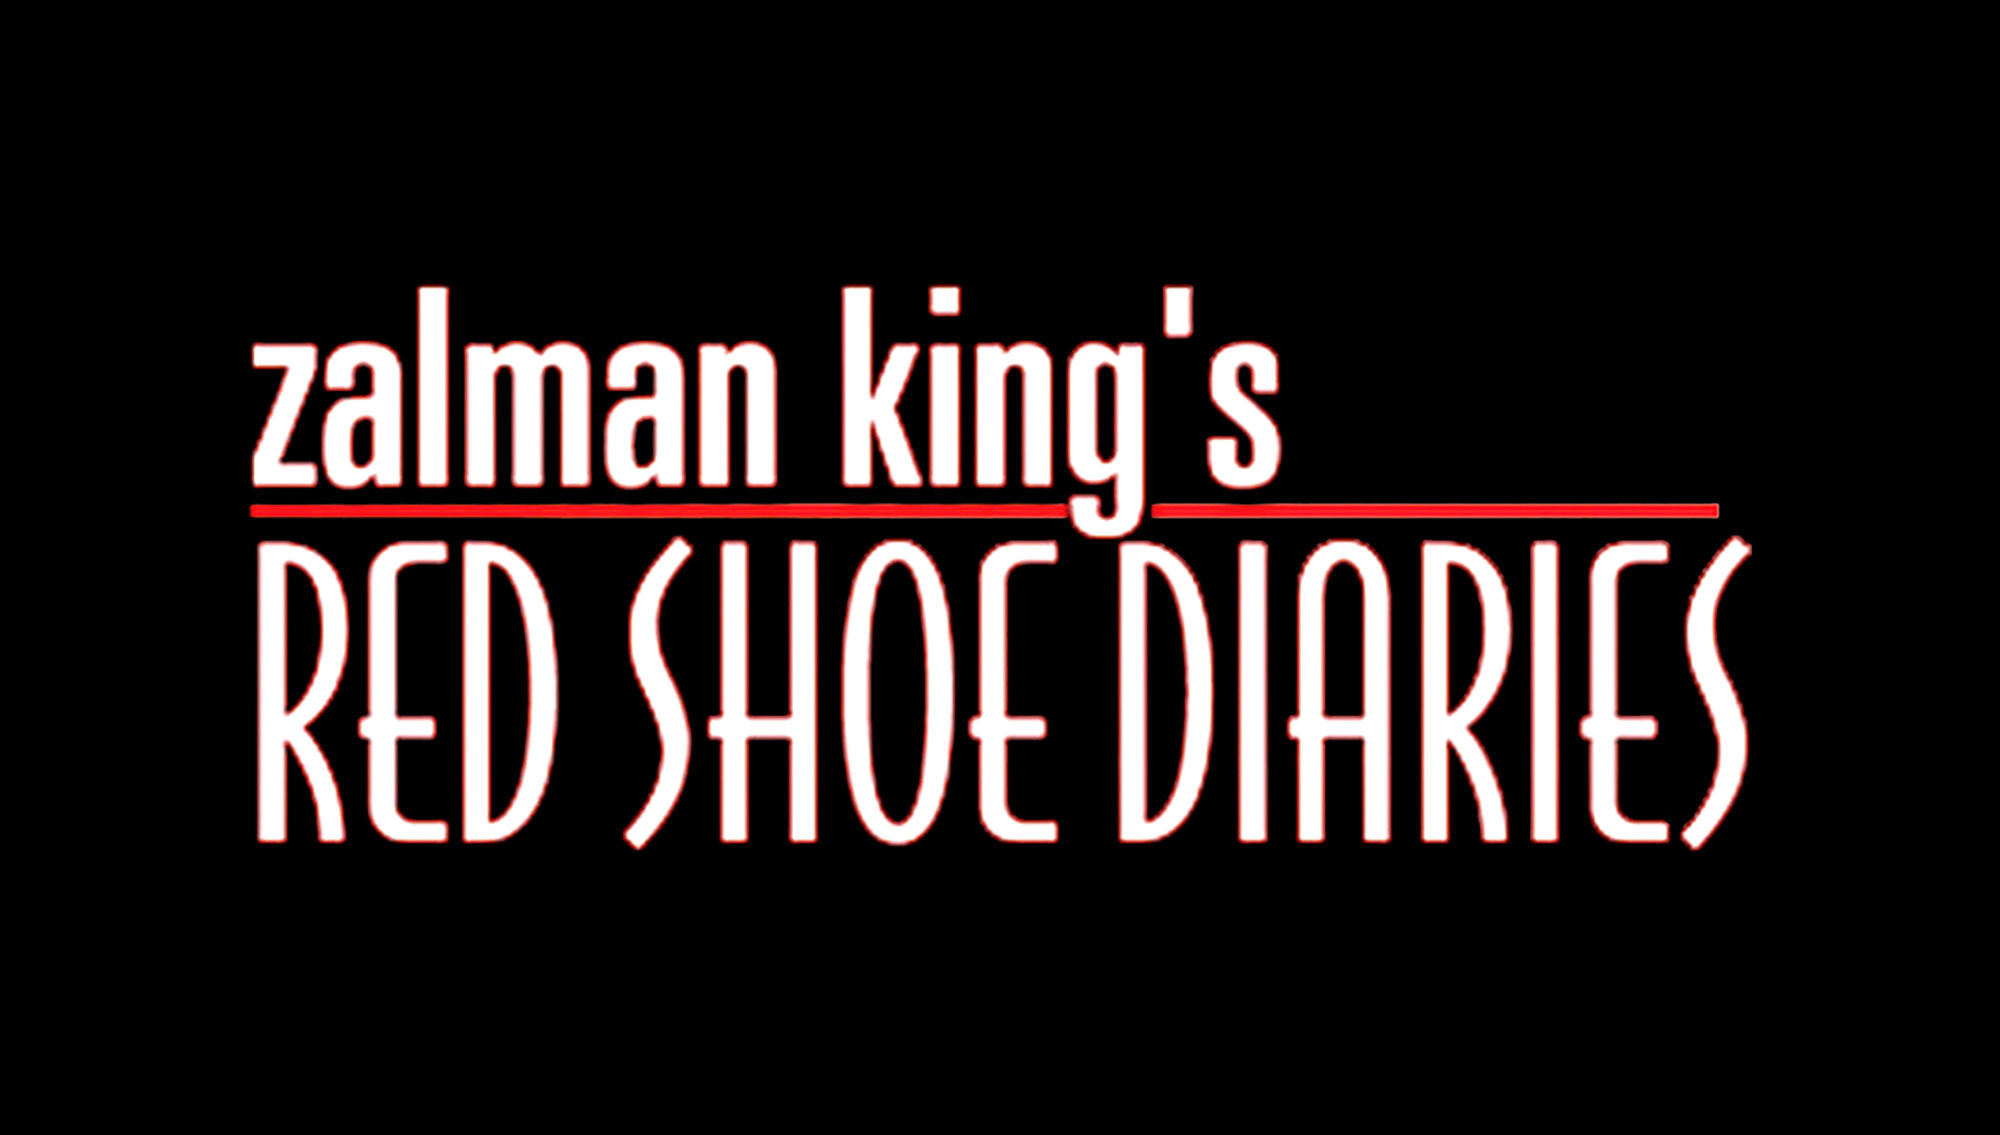 Red Shoe Diaries - Where to Watch and Stream - TV Guide